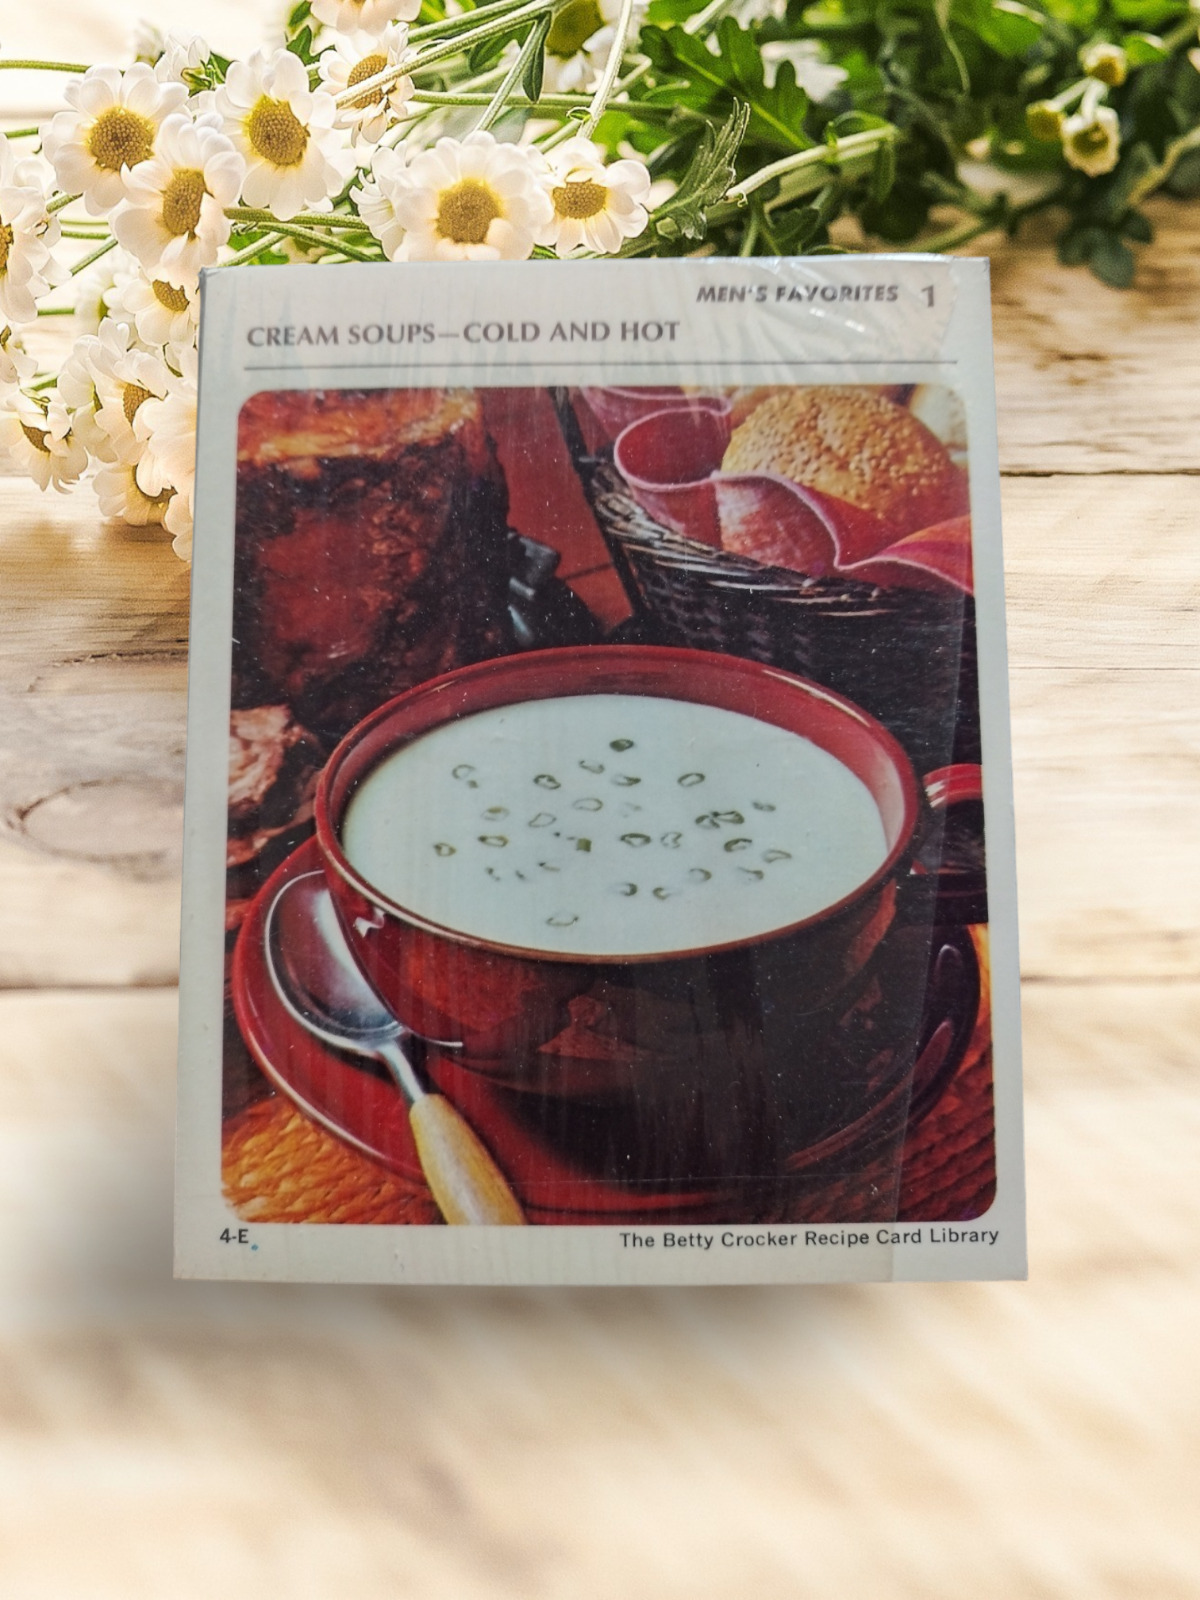 Betty Crocker Recipe Card Library 1971 Replacements: CREAM SOUPS COLD AND HOT